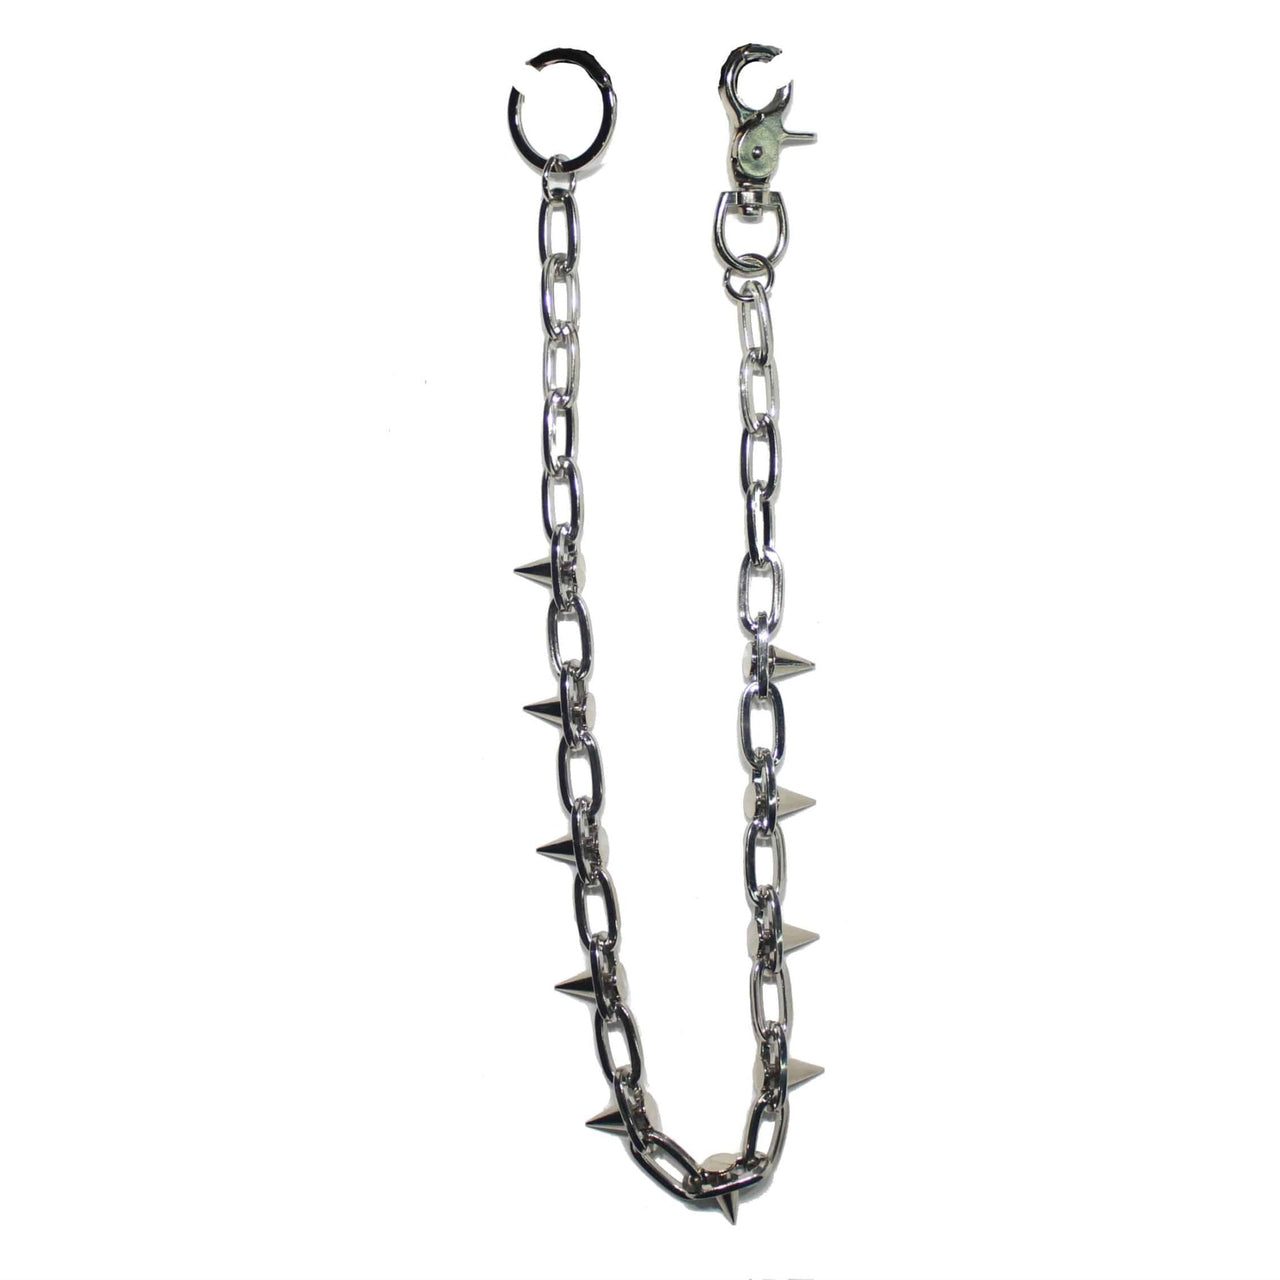 Chrome Spiked Wallet Chain 24"